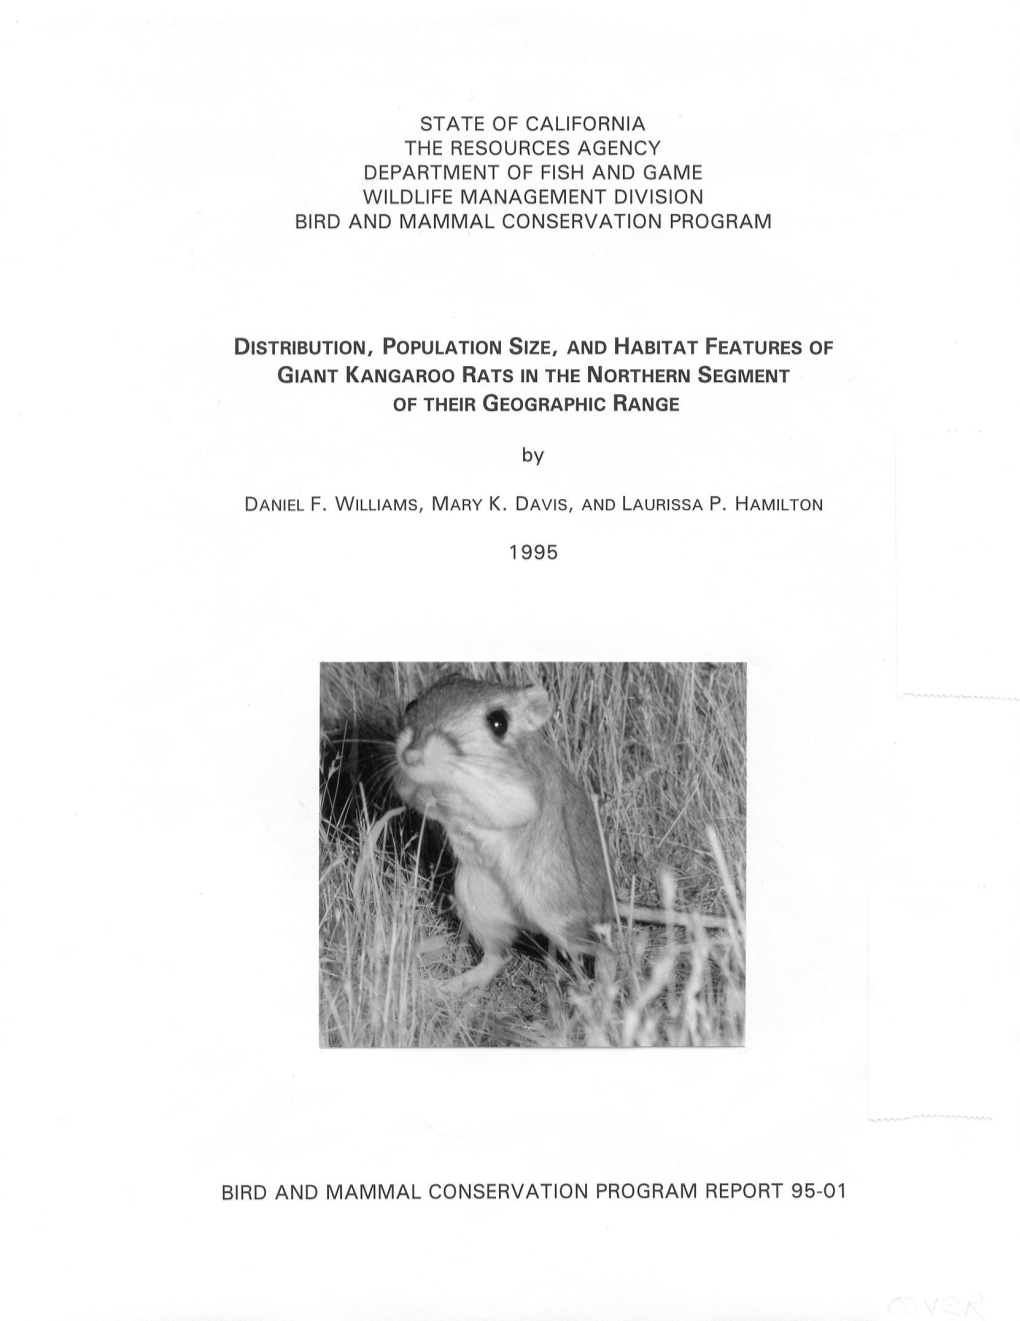 Distribution, Population Size, and Habitat Features of Giant Kangaroo Rats in the Northern Segment of Their Geographic Range